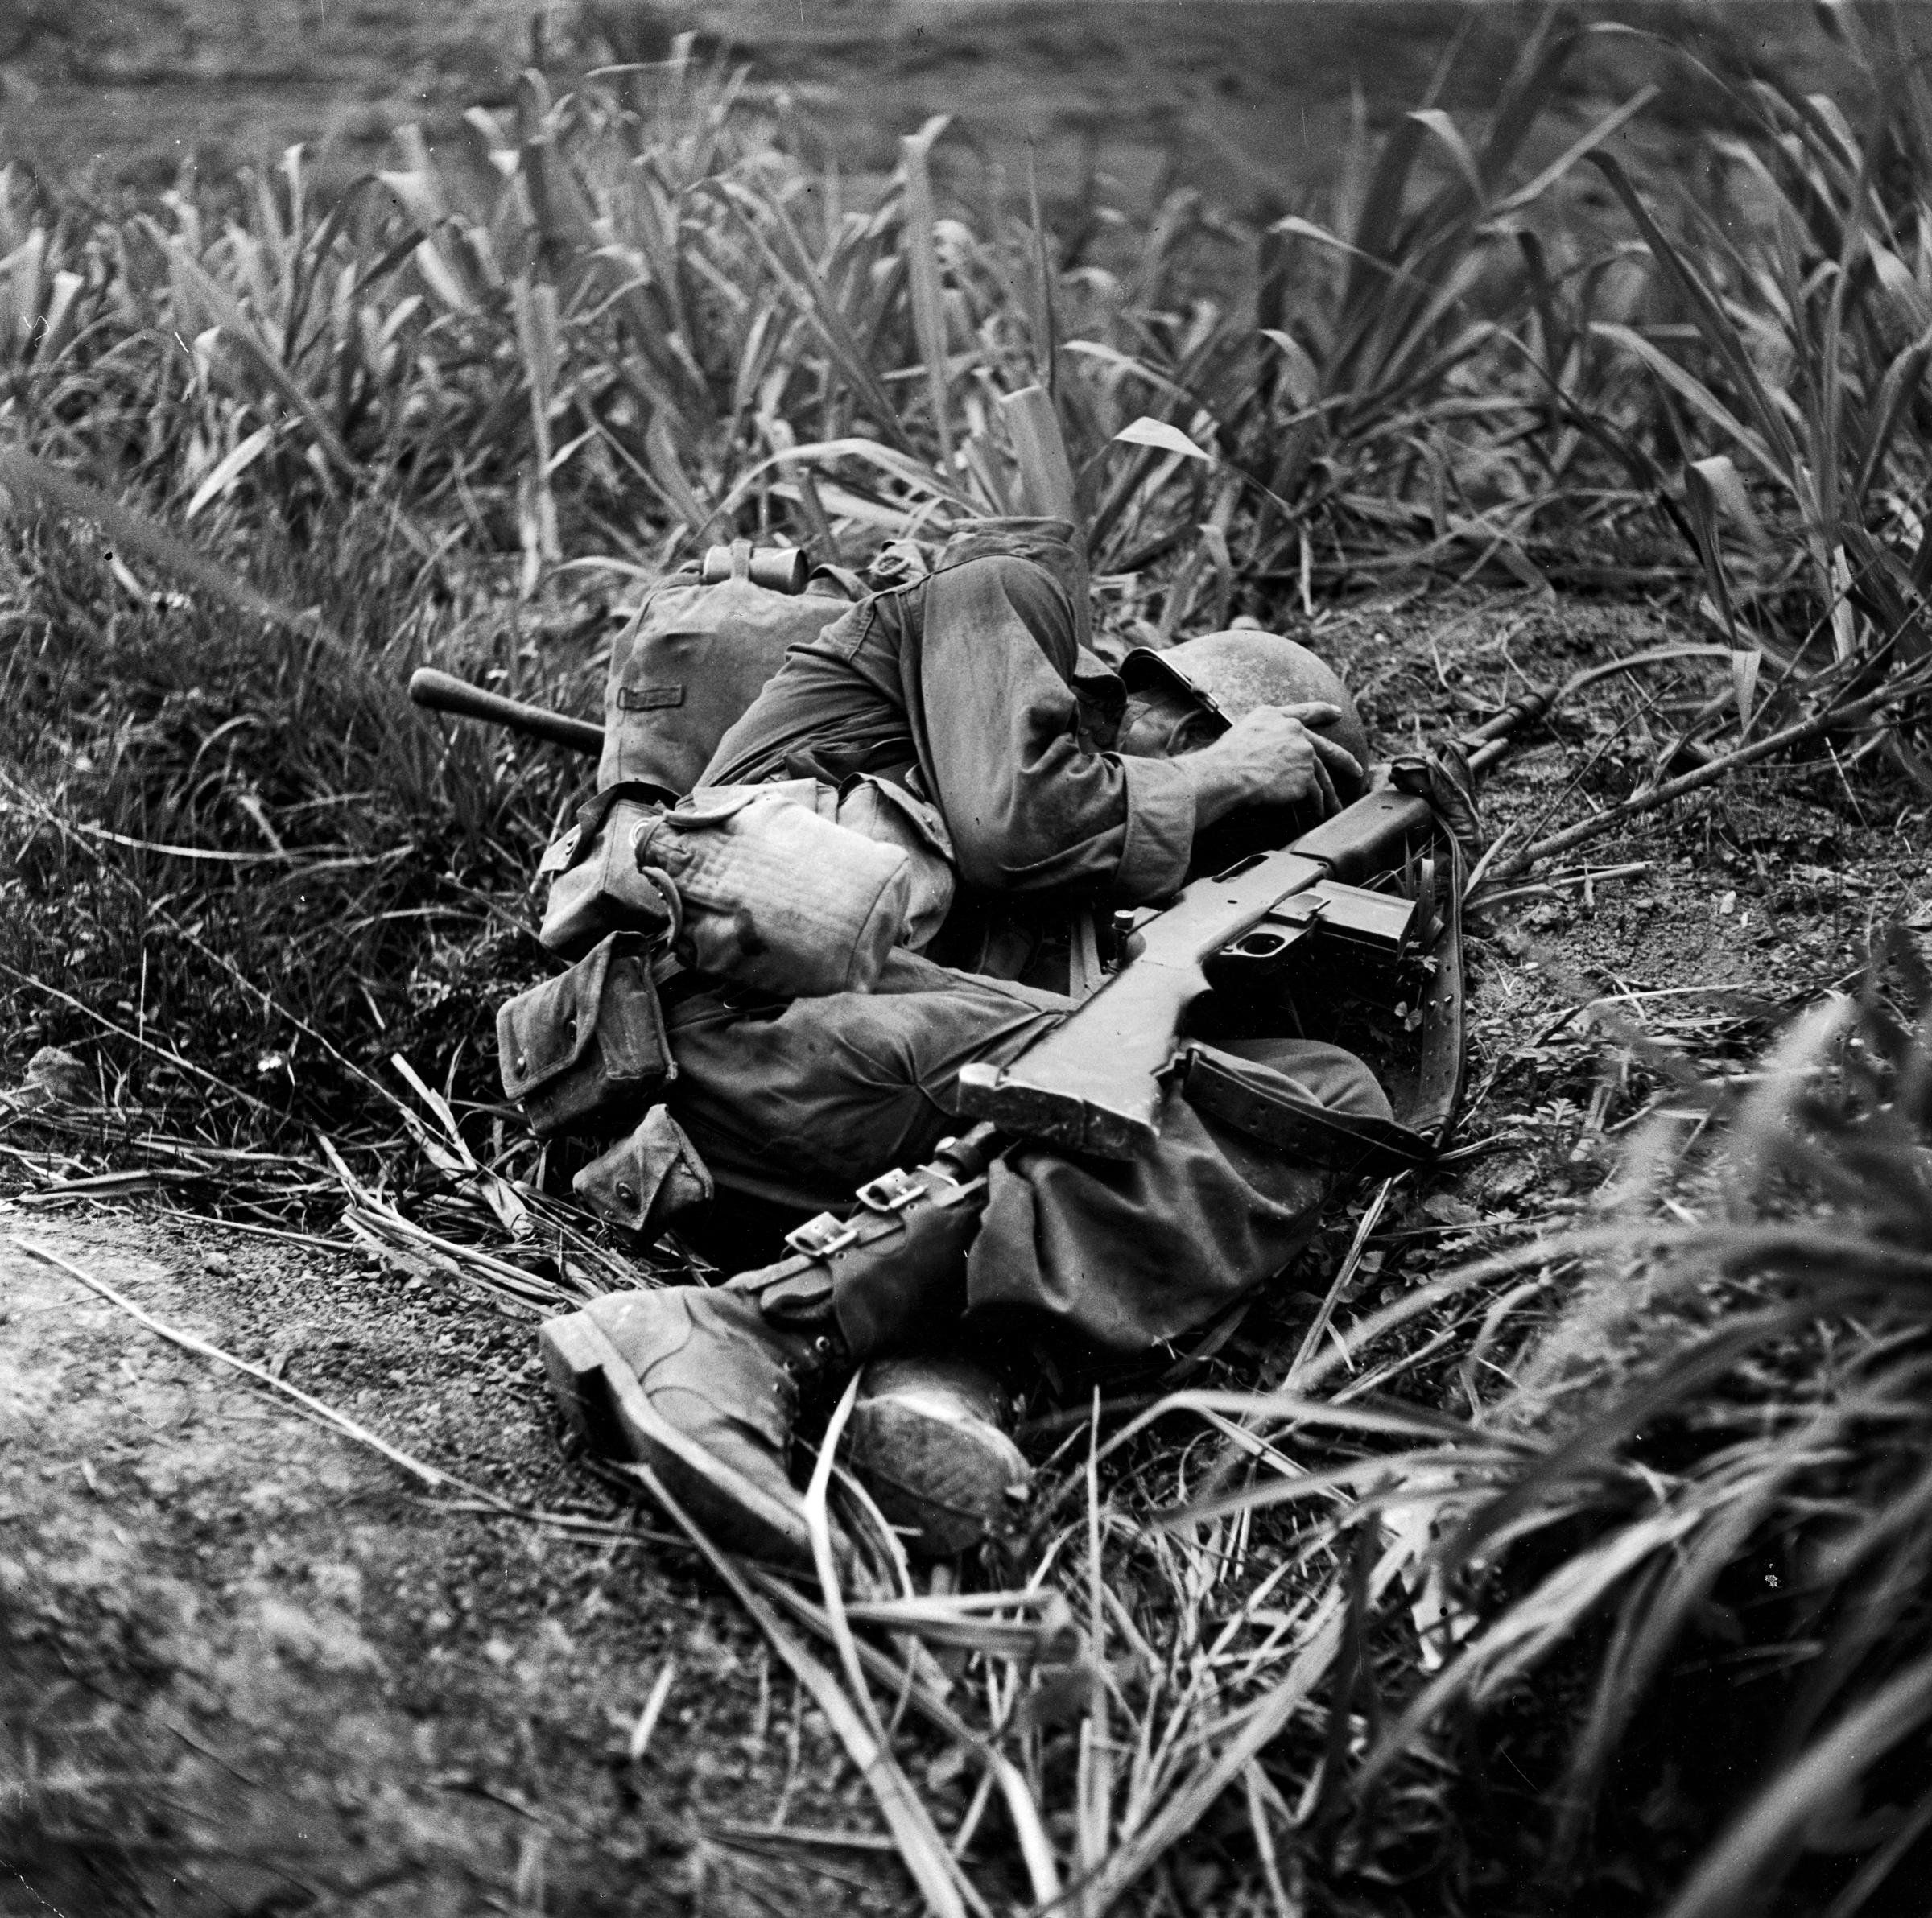 American infantryman Terry Moore takes cover as incoming Japanese artillery fire explodes nearby during the fight to take Okinawa, May 1945.